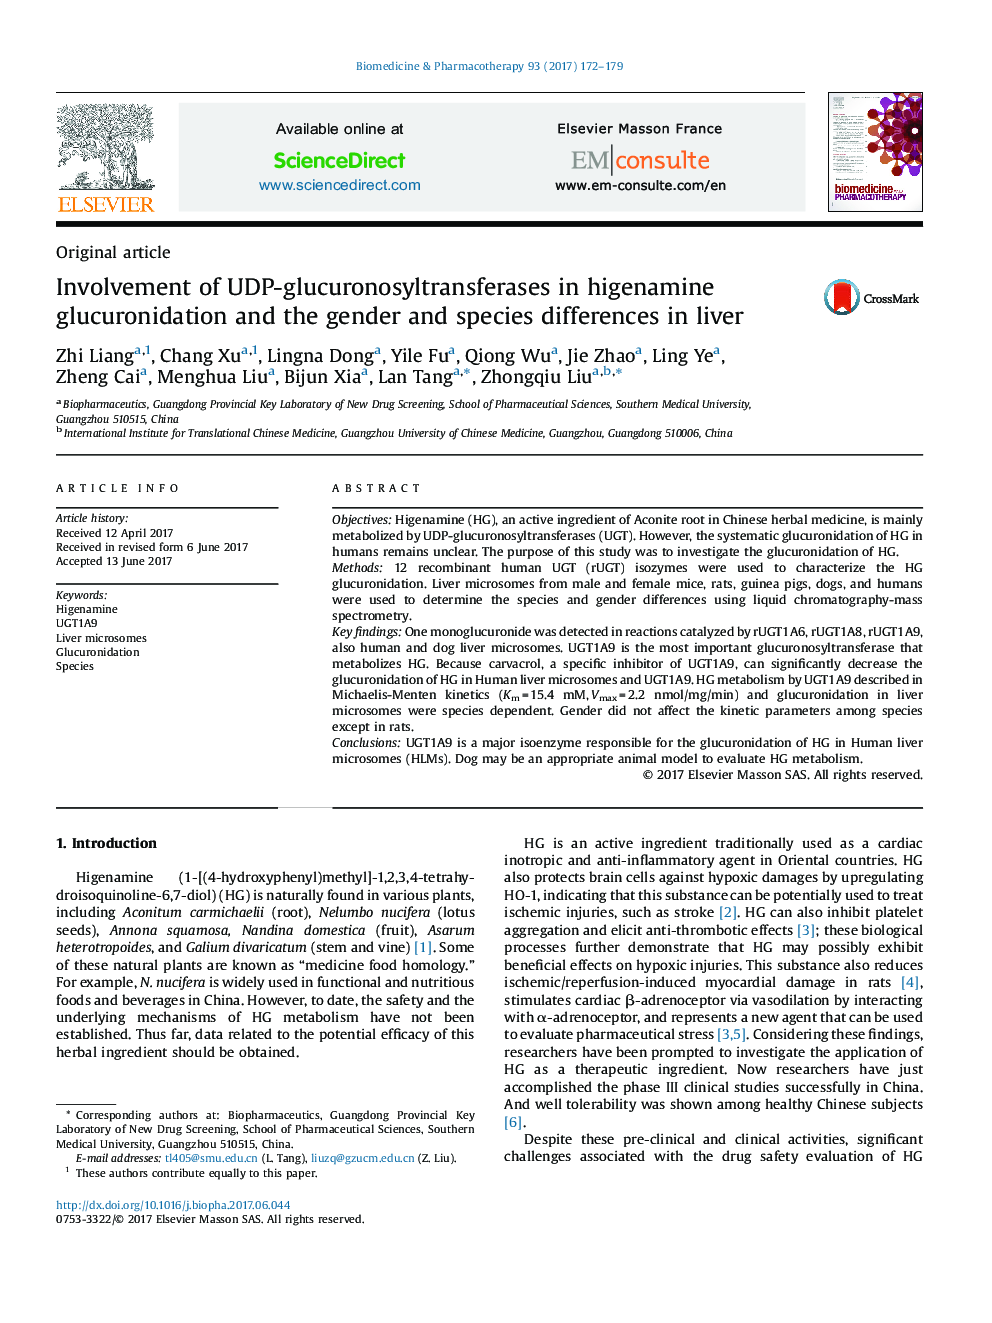 Involvement of UDP-glucuronosyltransferases in higenamine glucuronidation and the gender and species differences in liver